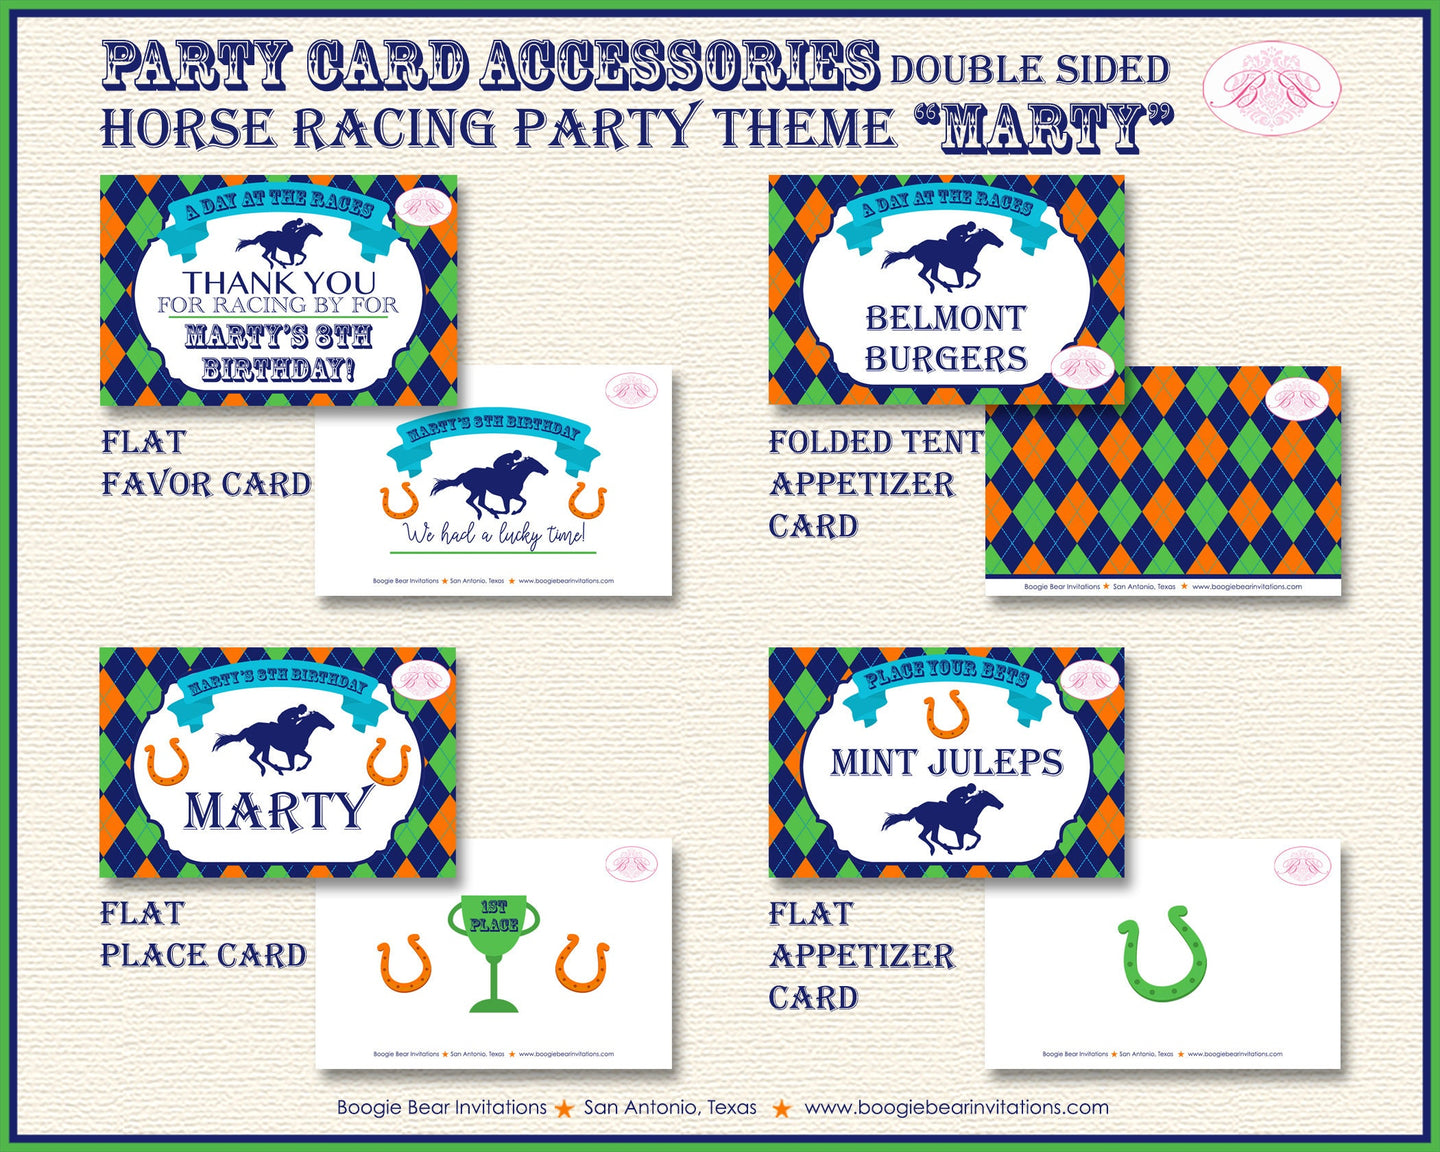 Horse Racing Birthday Party Favor Card Tent Appetizer Food Place Orange Green Blue Kentucky Derby Jockey Boogie Bear Invitations Marty Theme